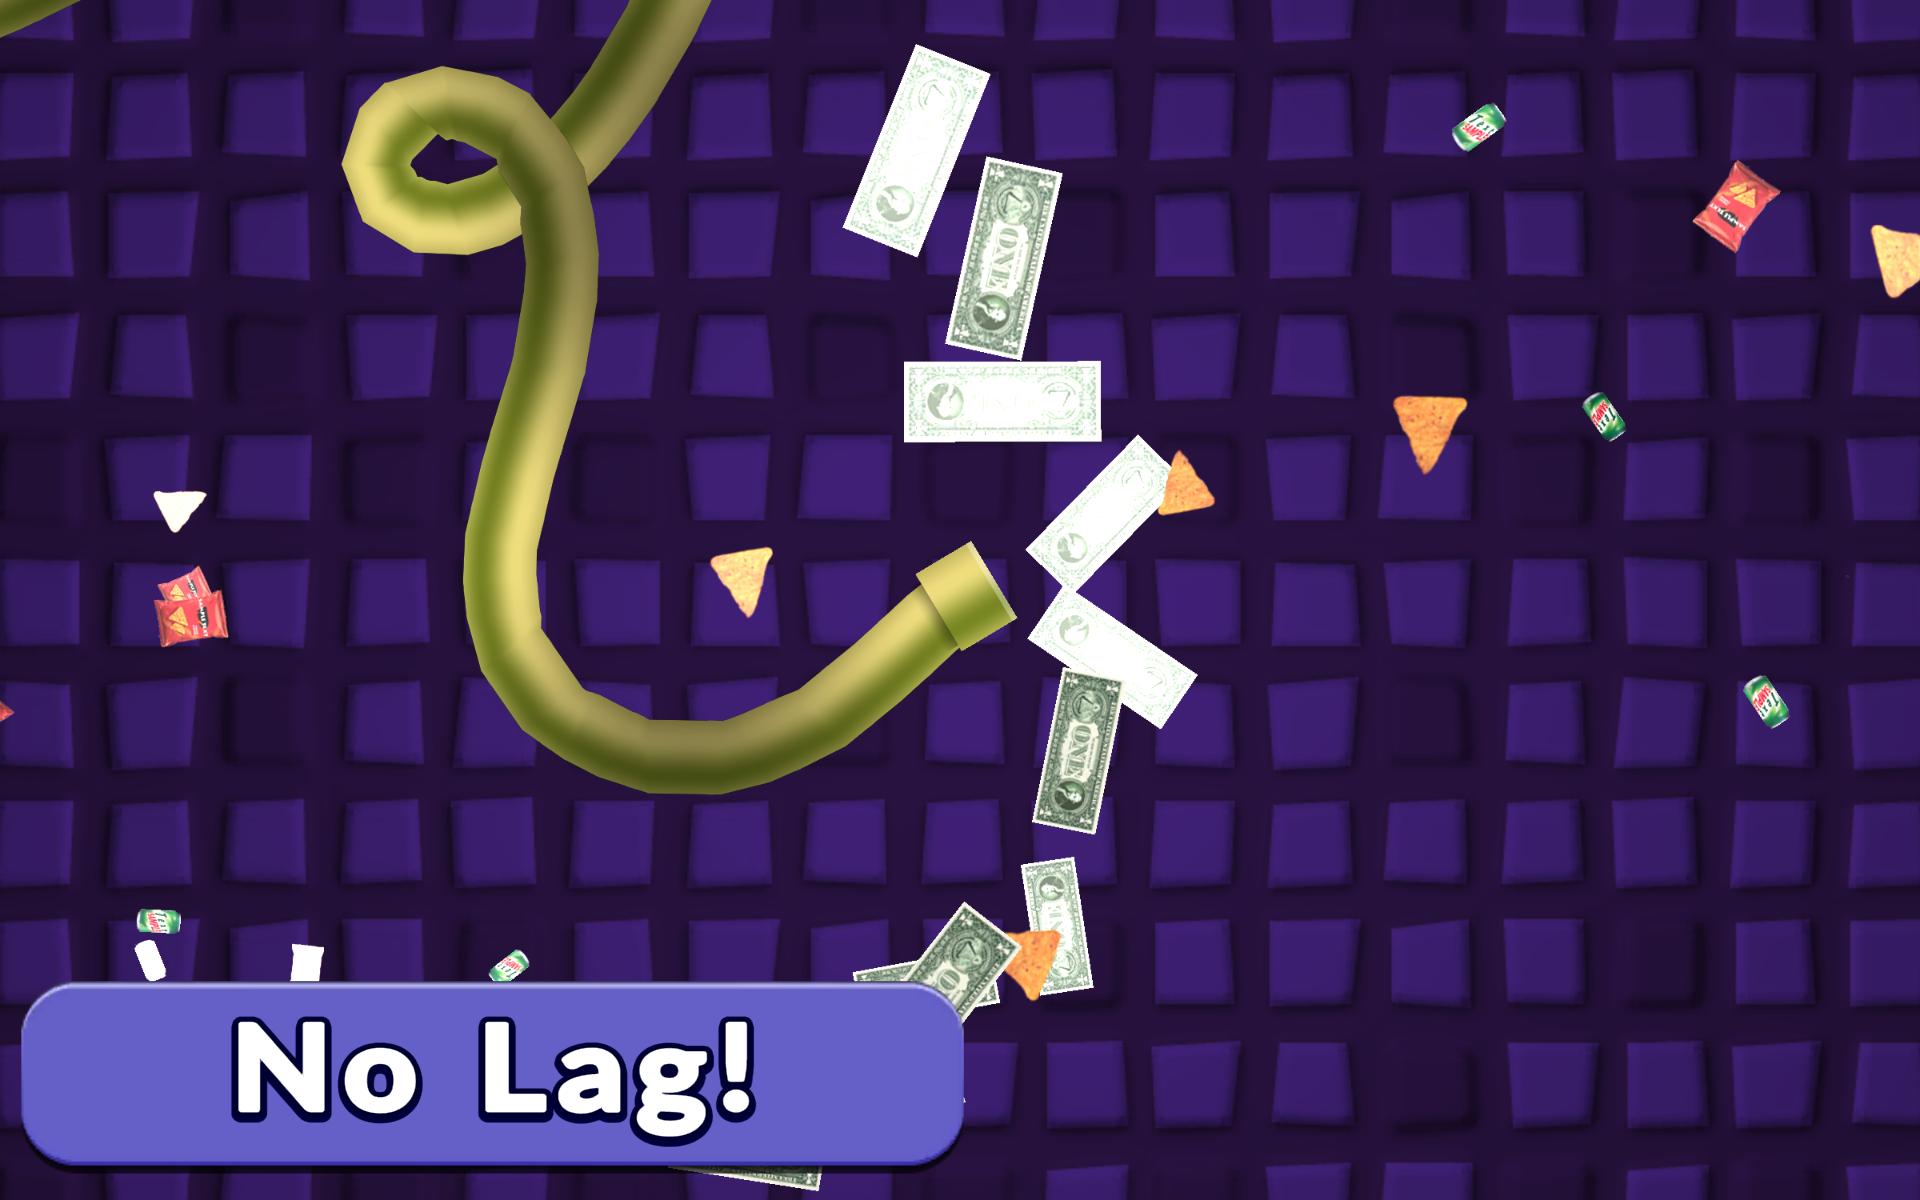 Snake.is - MLG Meme io Games for Android - APK Download